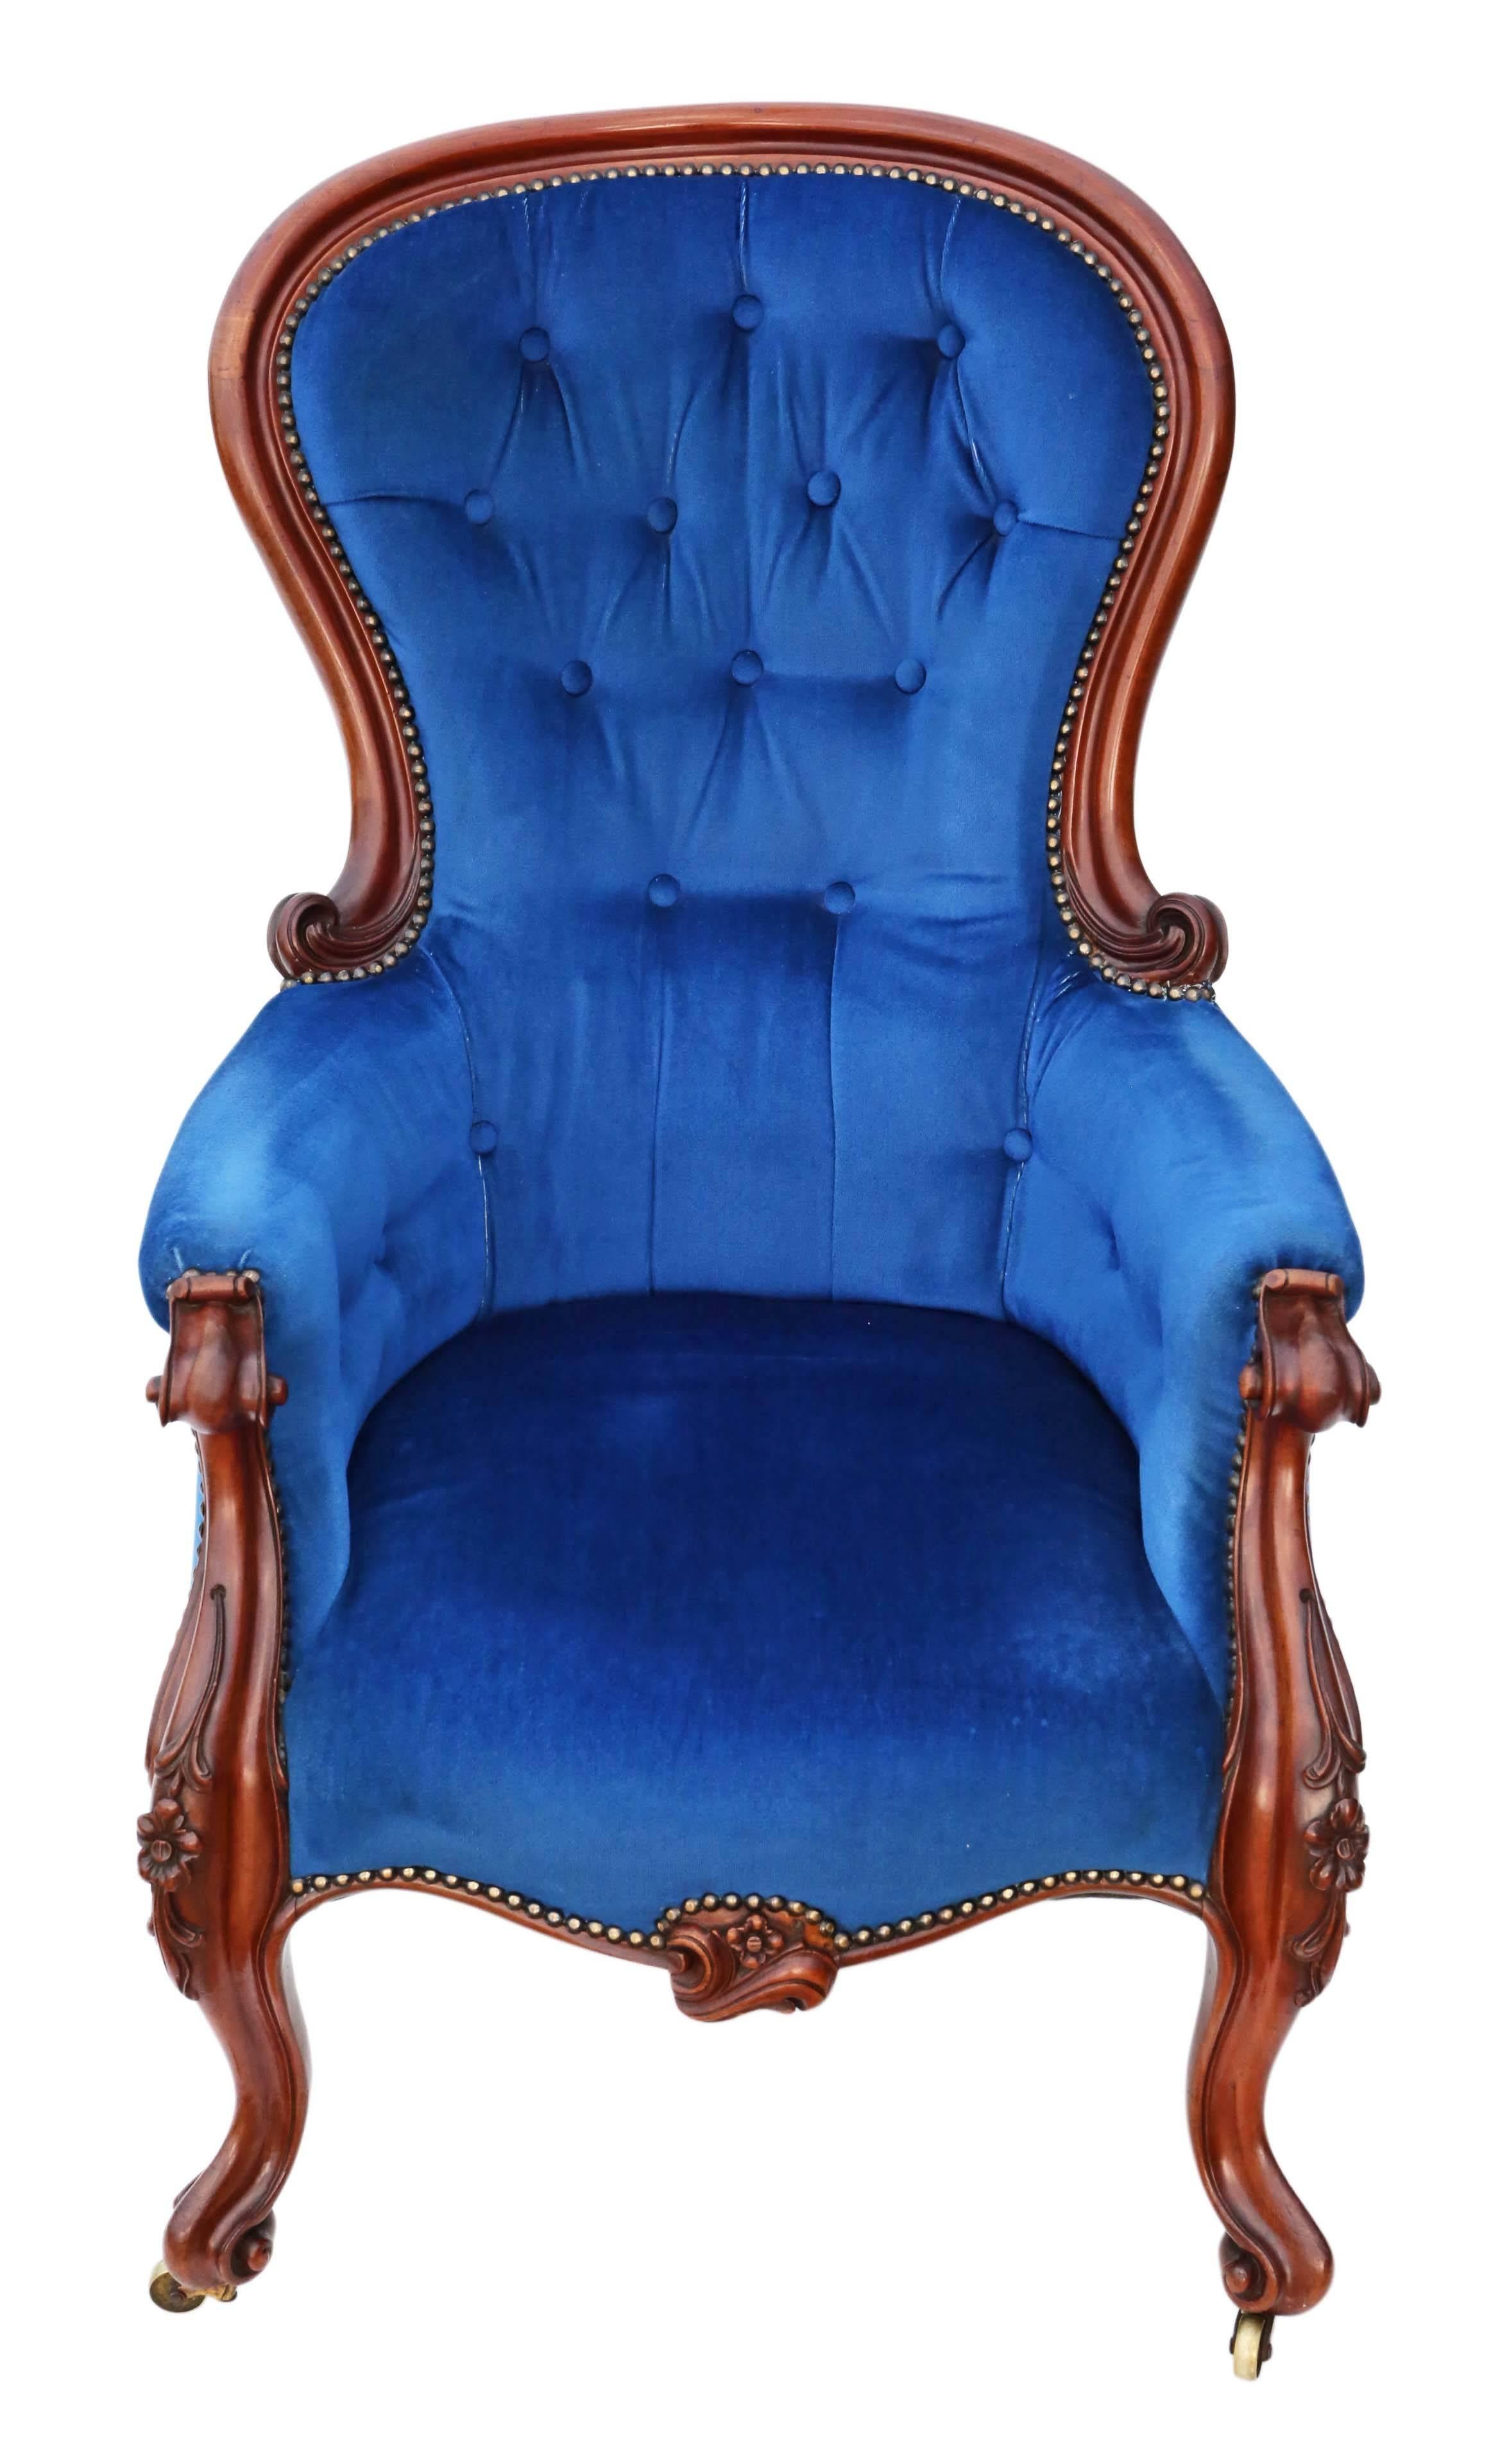 Antique quality Victorian circa 1870 mahogany slipper spoon back armchair.

Solid, no loose joints and no woodworm. Full of age, character and charm. A very decorative chair. The royal blue velour button back upholstery is not new, but has little